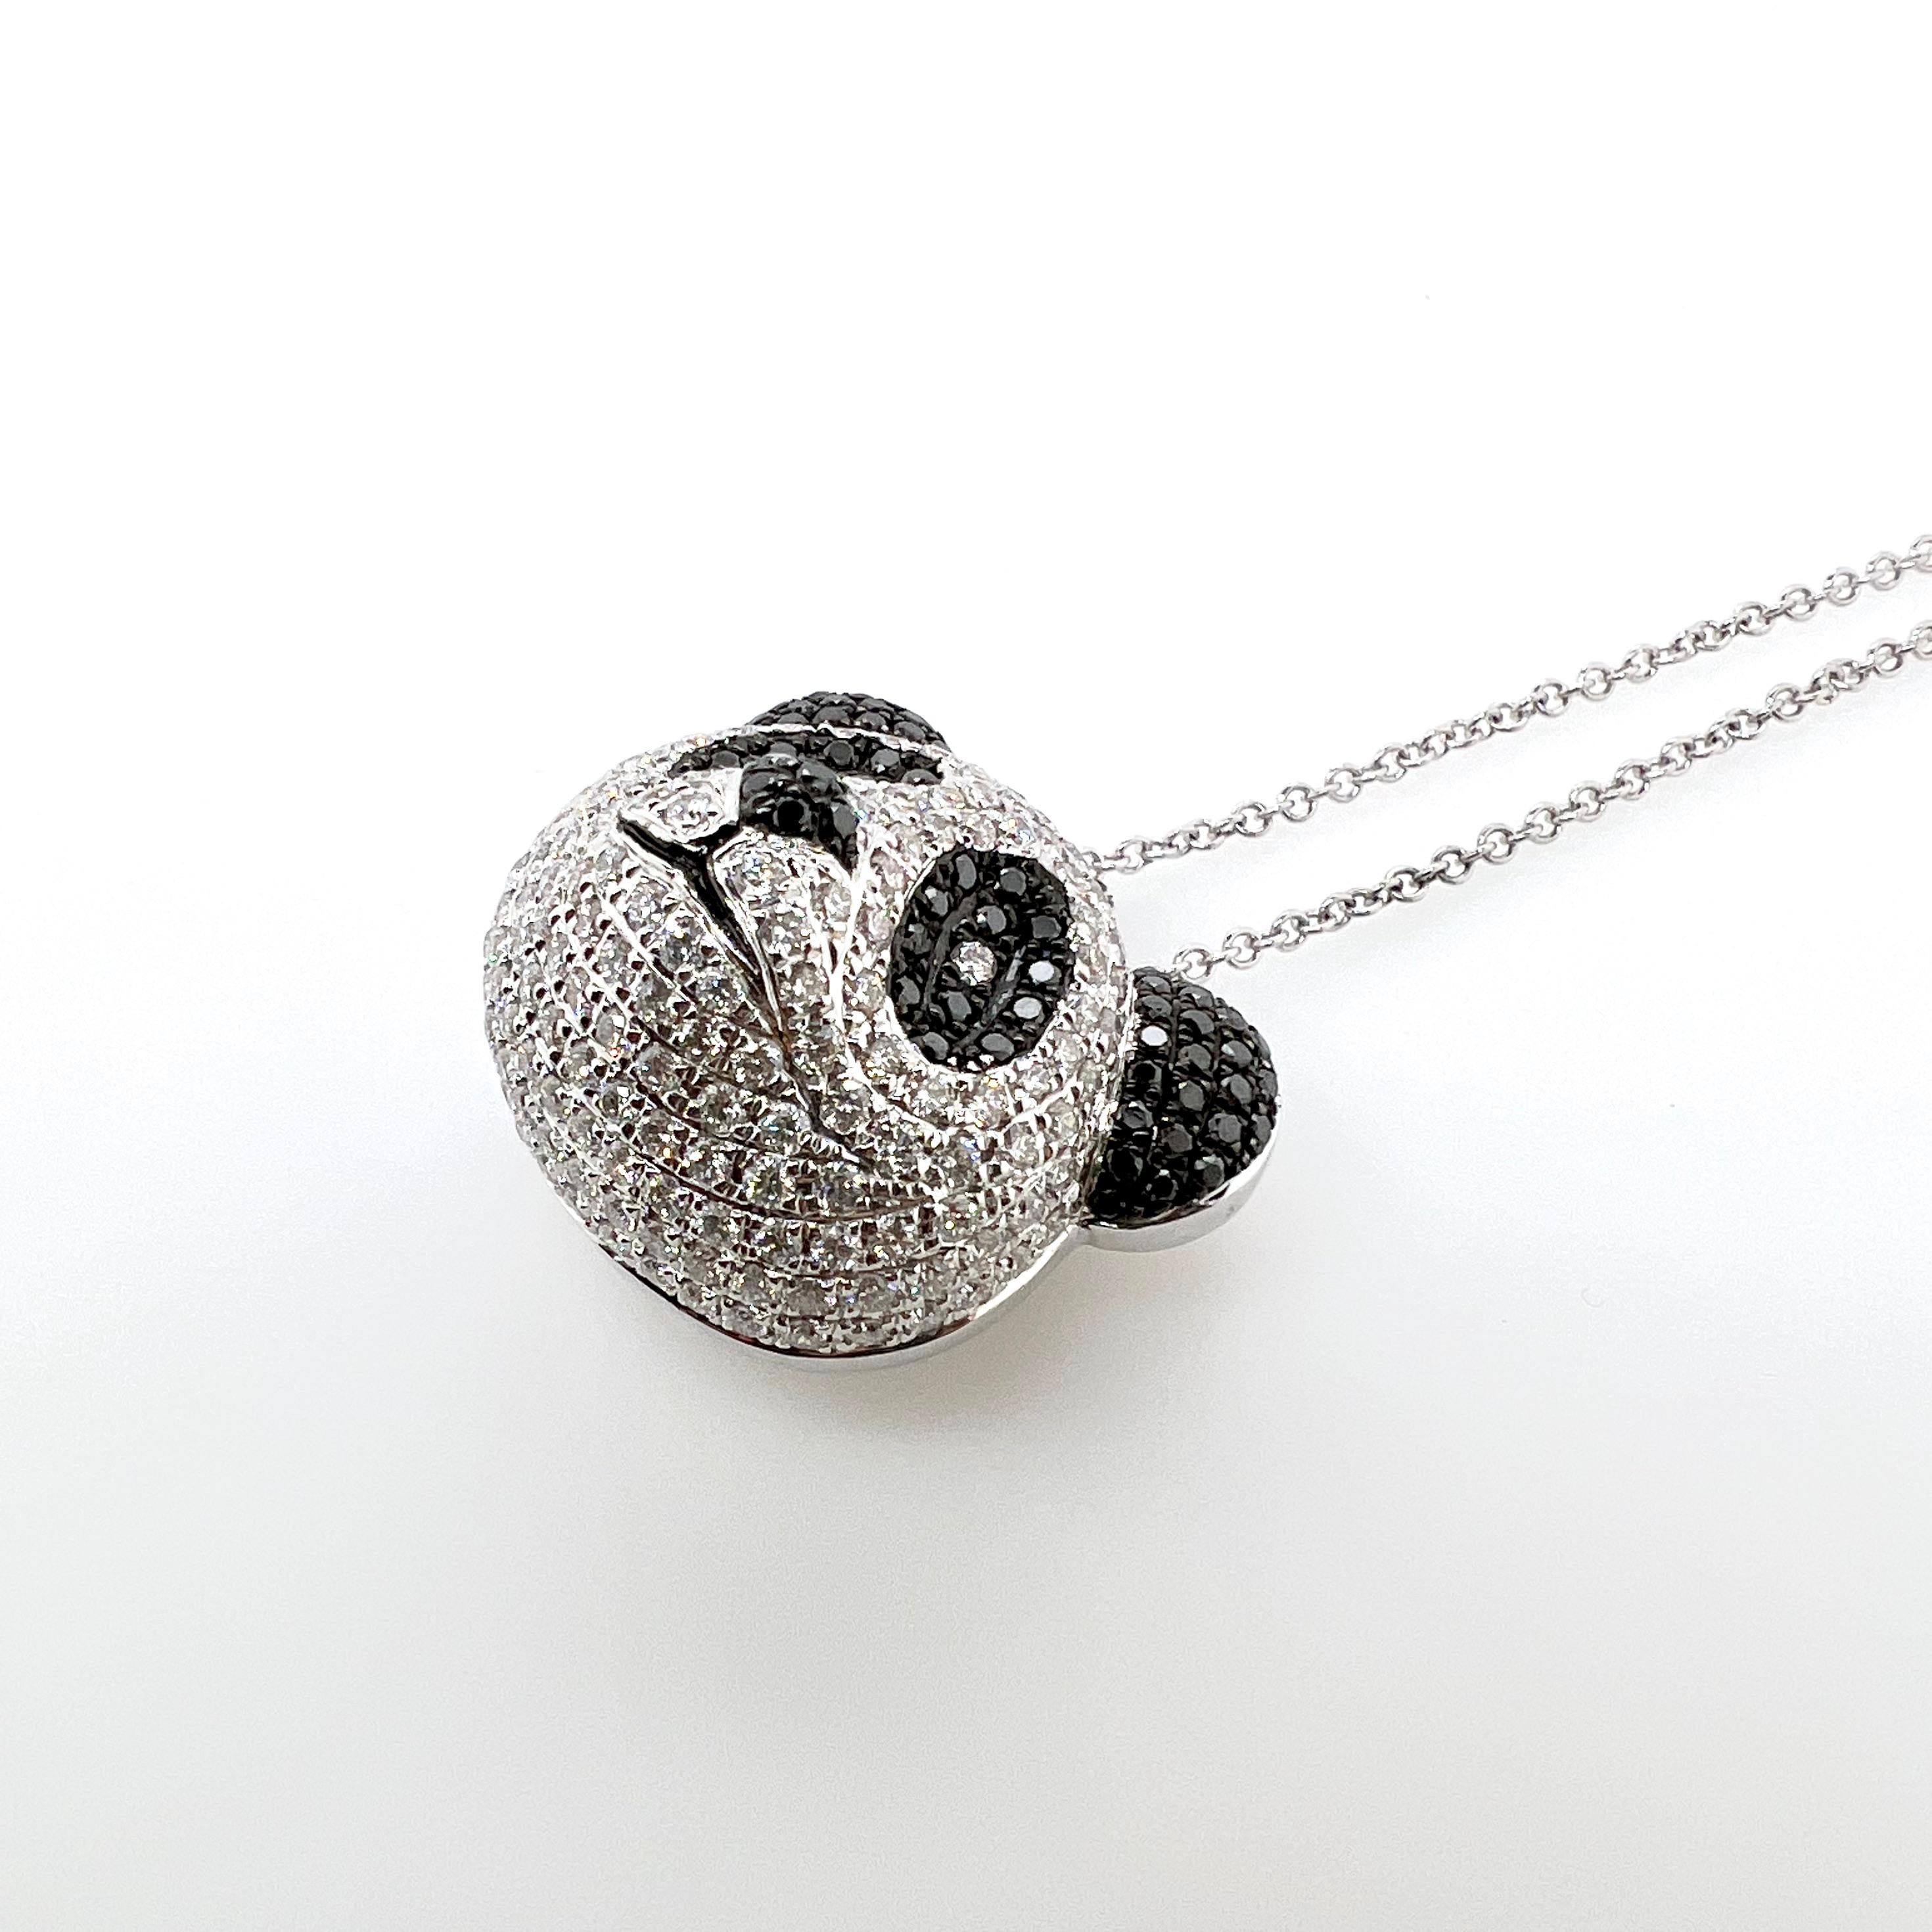 This absolutely fun panda bear will be a novelty and keepsake for generations!  This 18k white gold panda bear is made to mimic the puffy and 3 dimensional look of an actual Panda!  The black and white diamonds outline the facial features of this